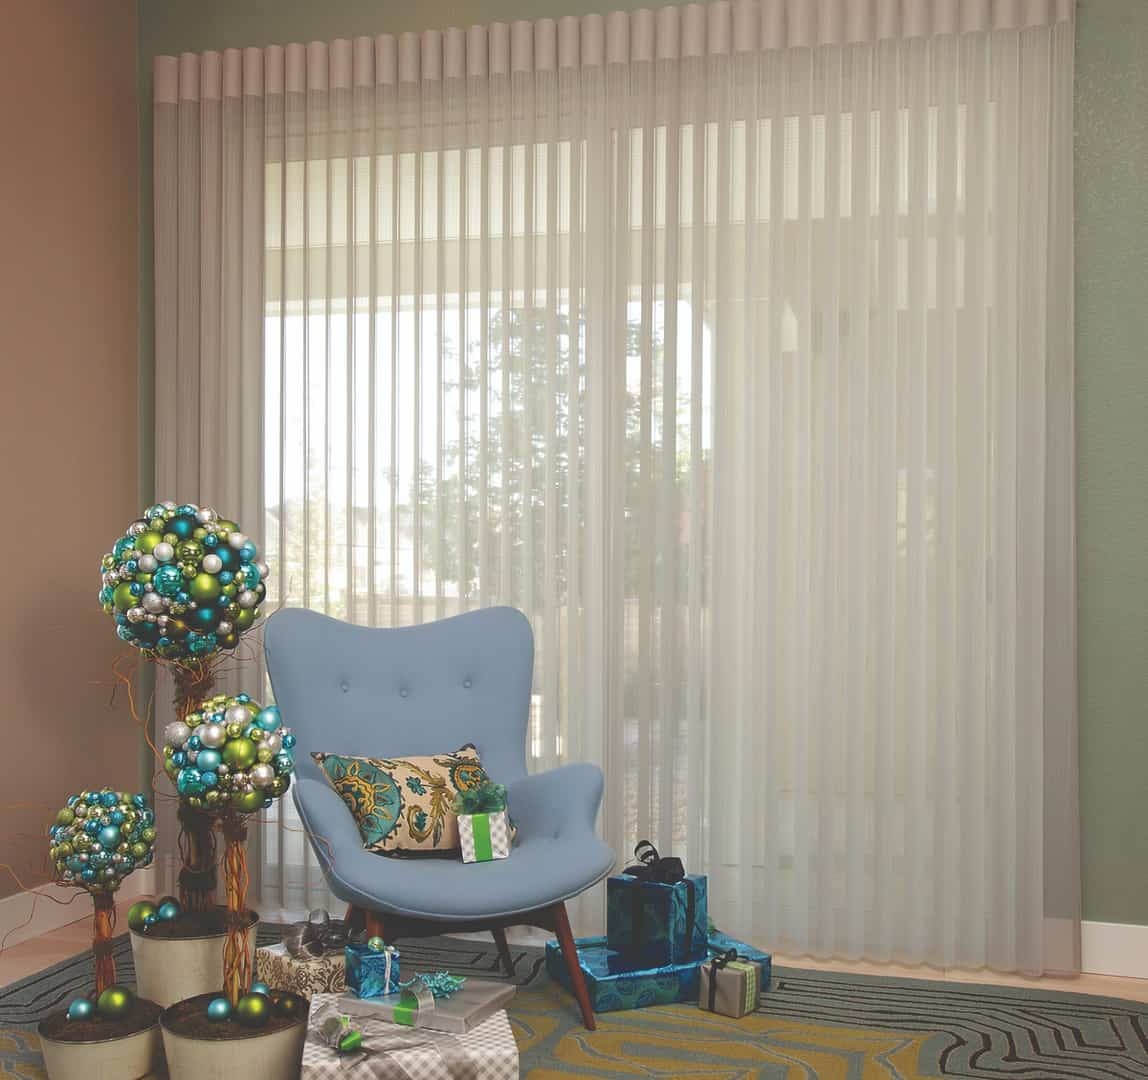 Luminette® Window Shades near Vista, California (CA) transform your living room with sheers and shadings.